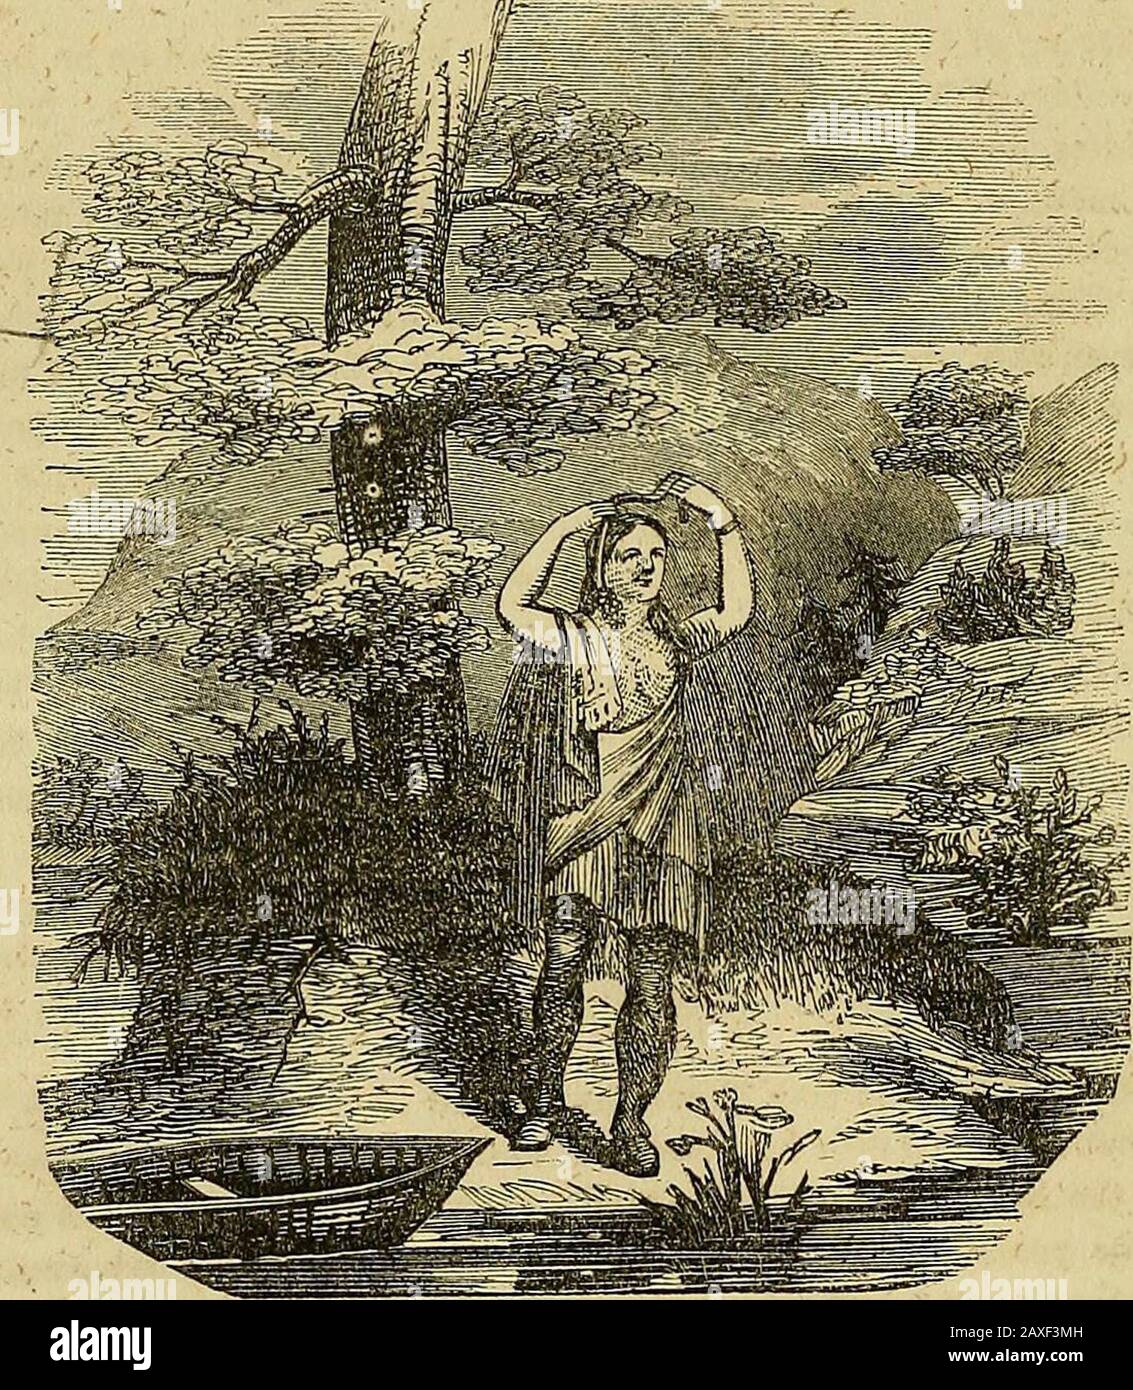 The pictorial sketch-book of Pennsylvania : or, its scenery, internal improvements, resources, and agriculture, popularly described . rdered all the relations of Logan, evenmy women and children. There runs not a drop of my blood in the veins of any living creature ; thiscalled on me for revenge. I have fought for it. I have killed many. I have9 N 98 LOCOMOTIVE SKETCHES. fully glutted my vengeance. For my country I rejoice at the beams of peace :but do not harbor a thought that mine is the joy of fear. Logan never felt fear.He will not turn on his heel to save his life. Who is there to mourn f Stock Photo